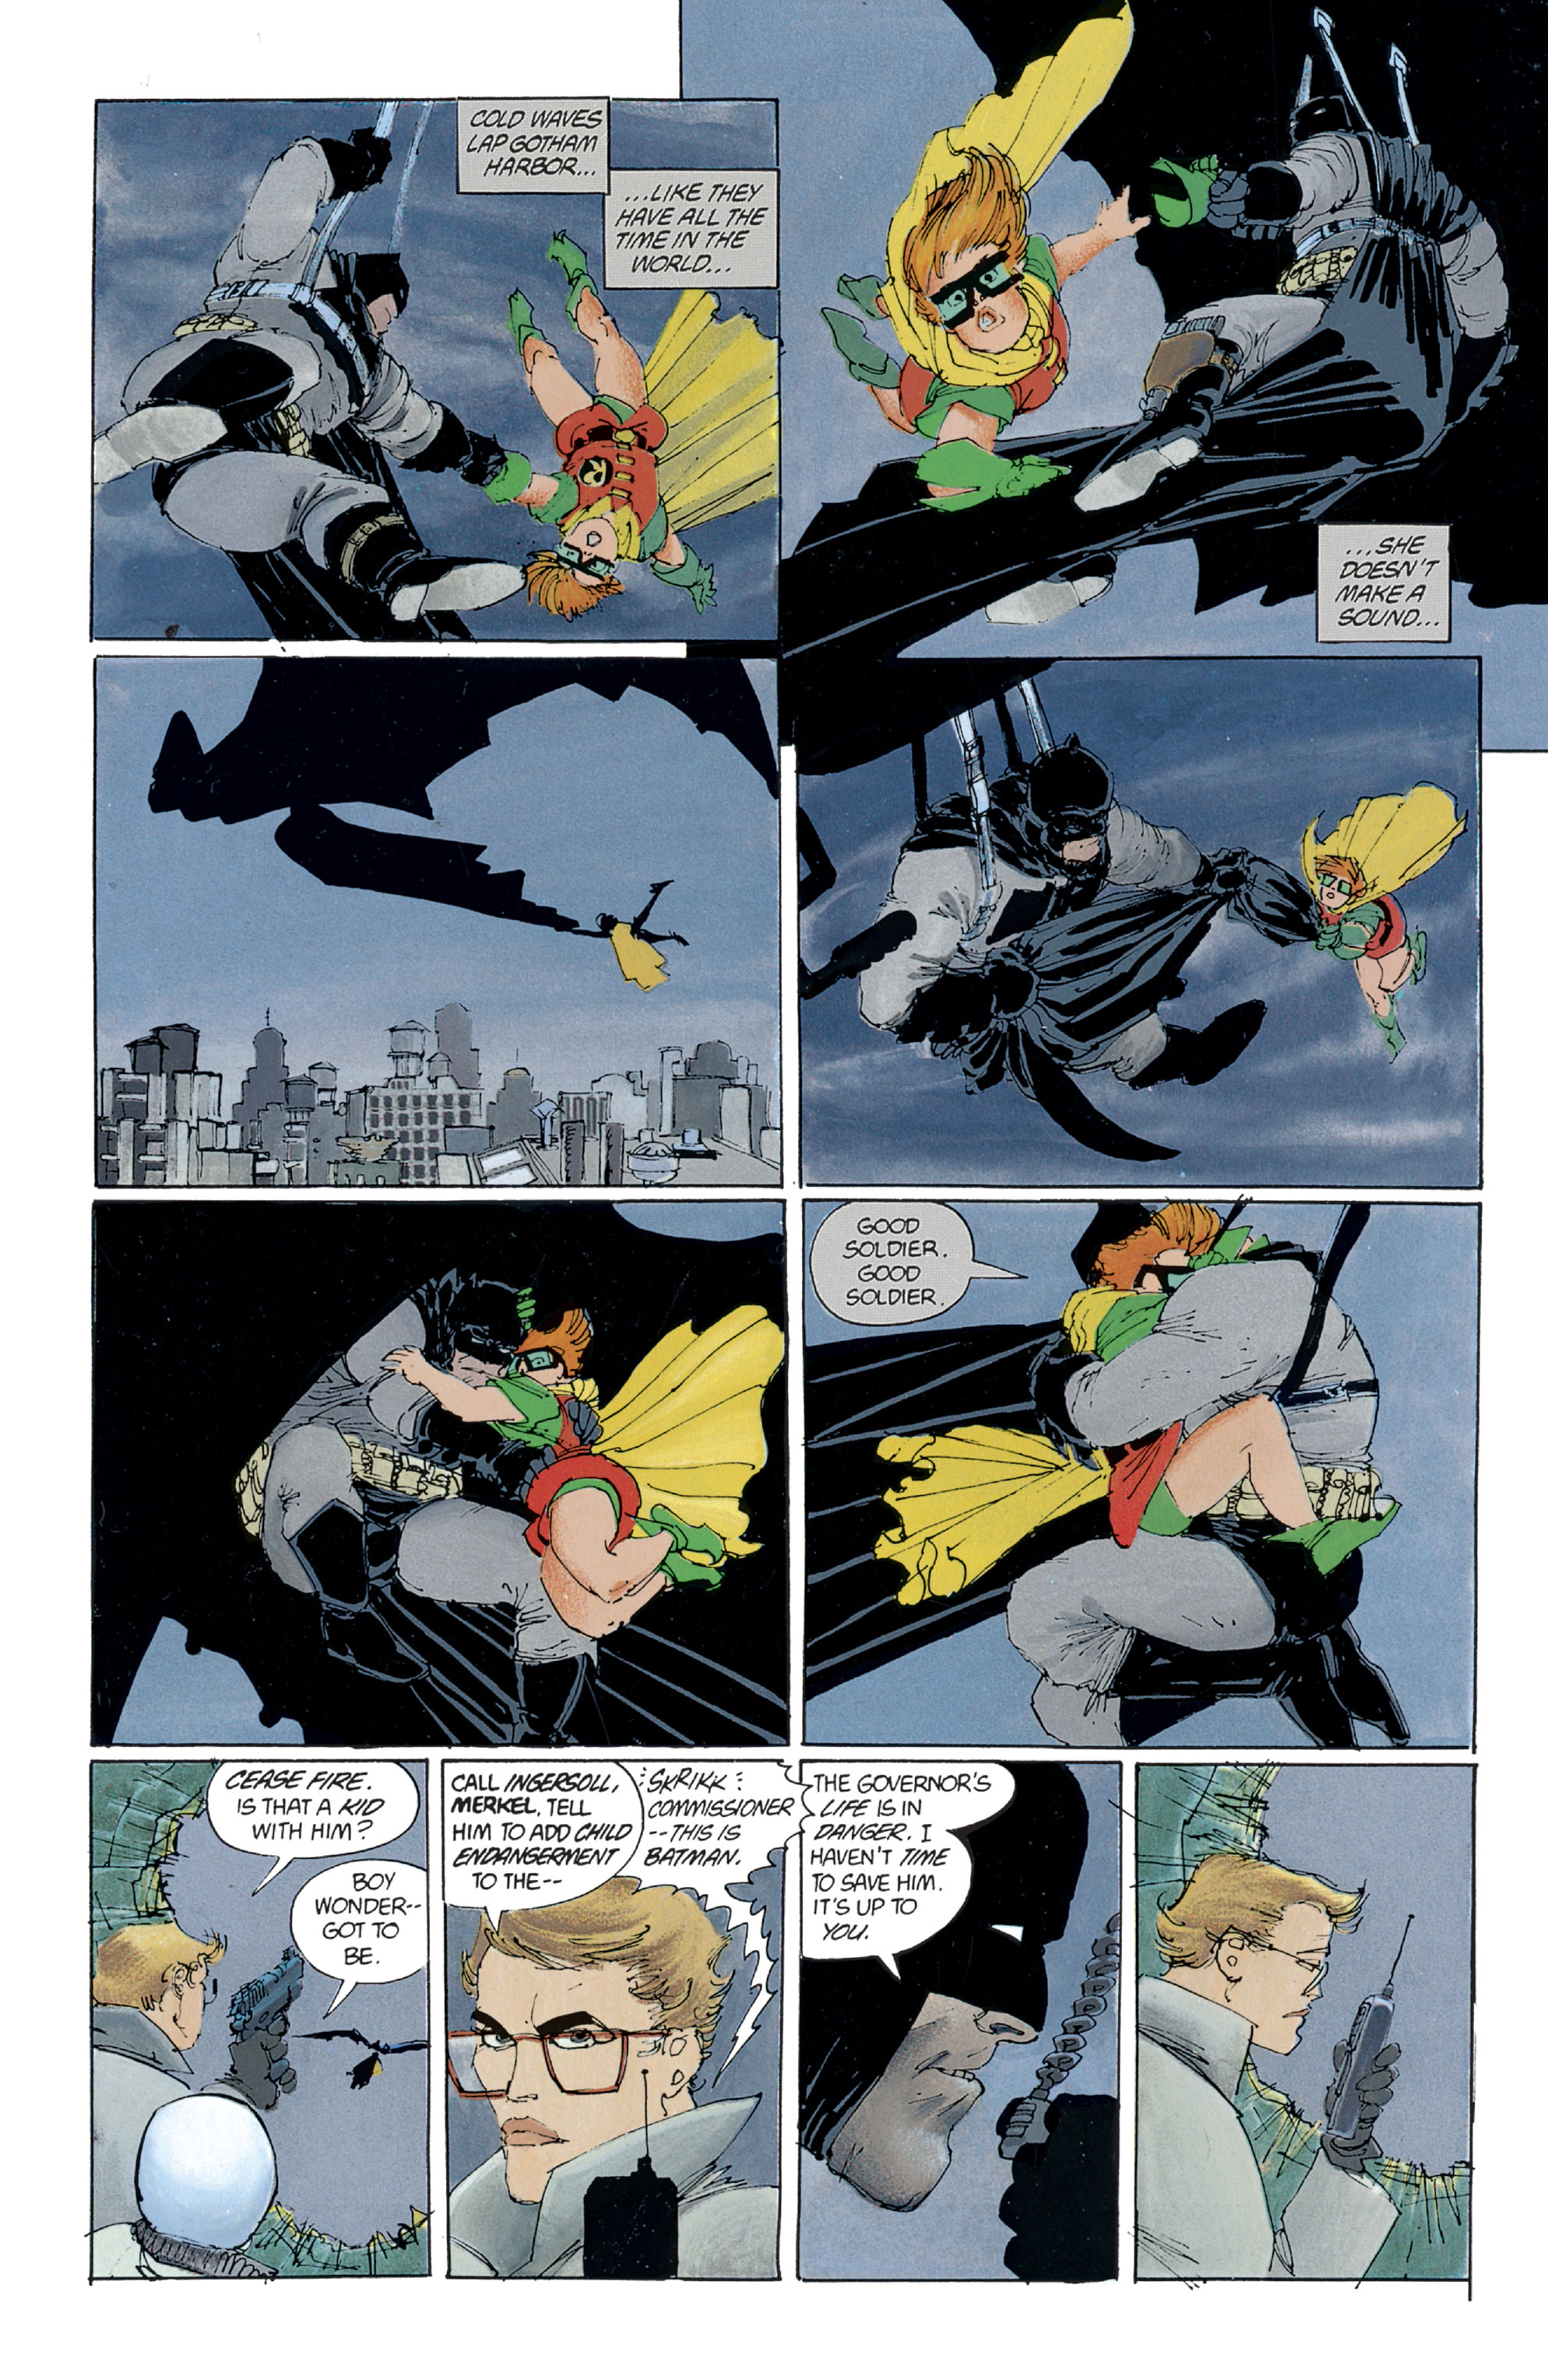 Batman The Dark Knight Returns Issue 3 | Read Batman The Dark Knight Returns  Issue 3 comic online in high quality. Read Full Comic online for free -  Read comics online in